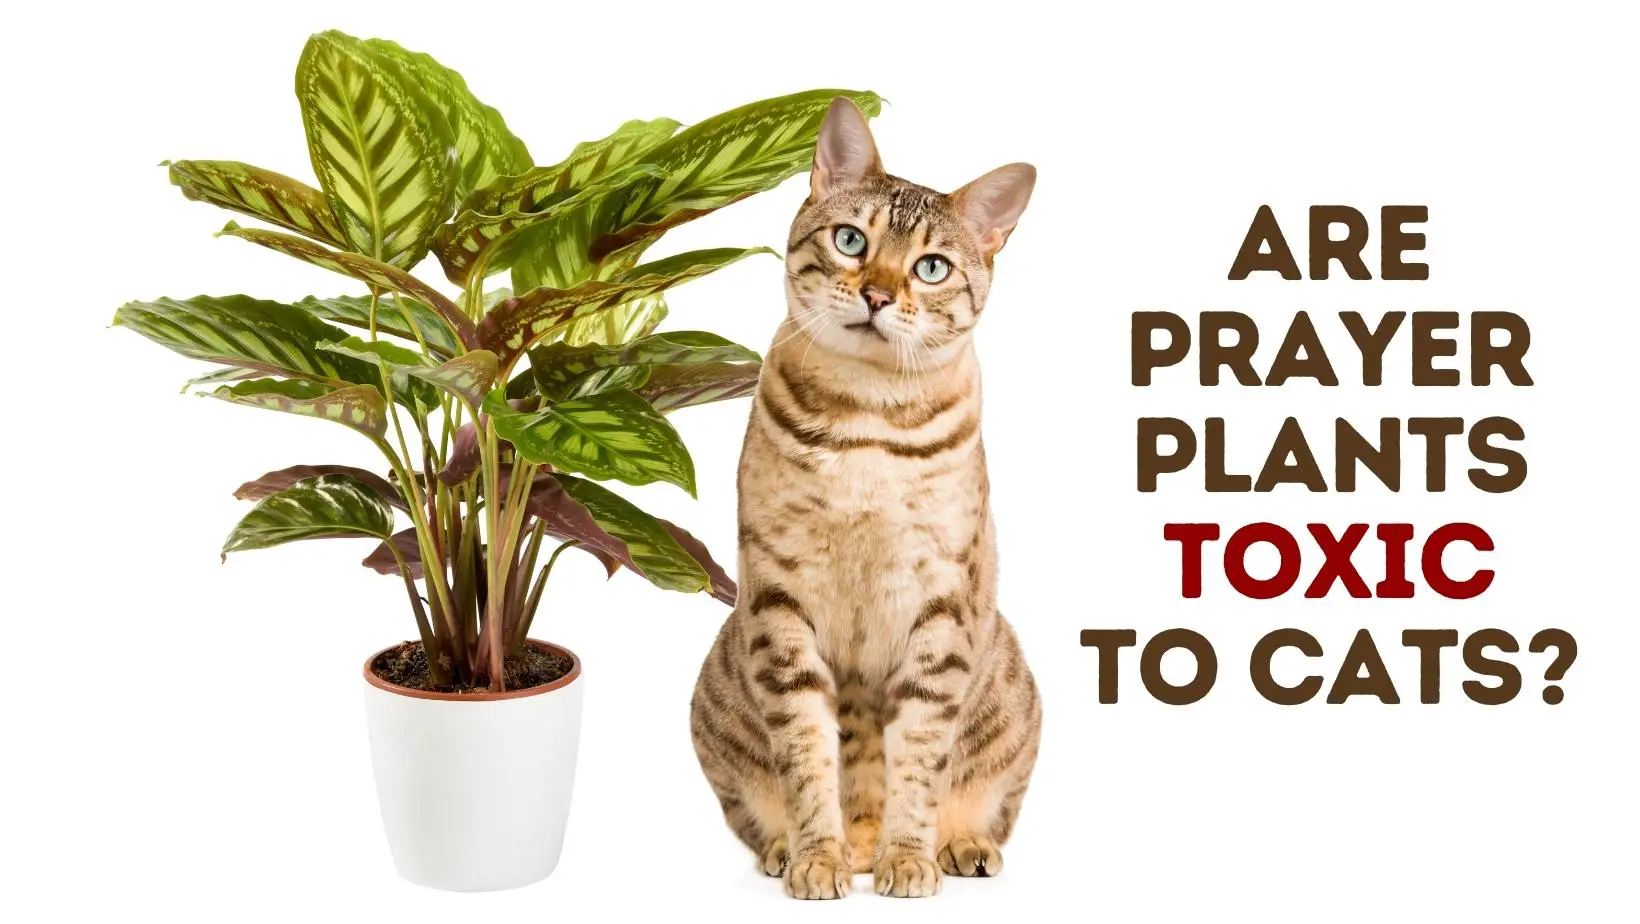 Are Prayer Plants Toxic to Cats?